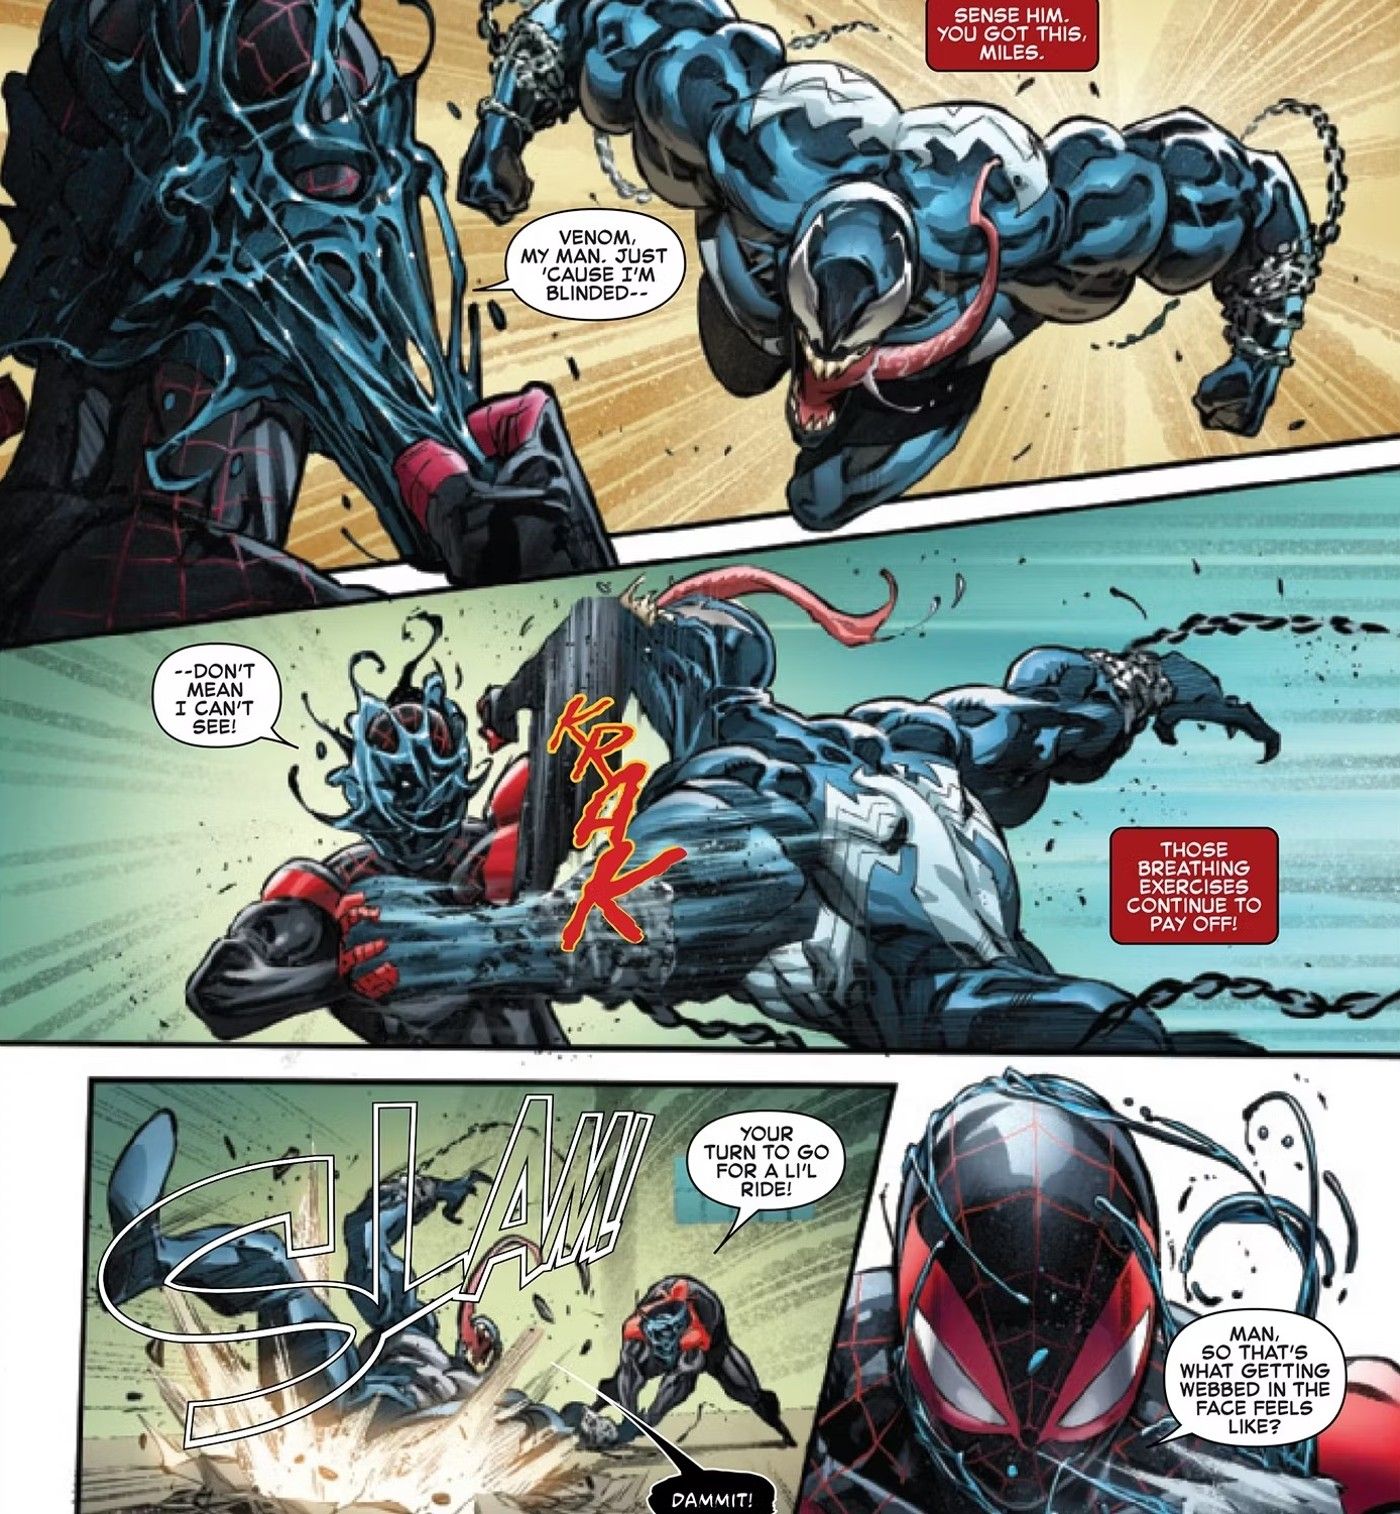 Miles Morales’ New Power Lets Him Beat Venom with His Eyes Closed